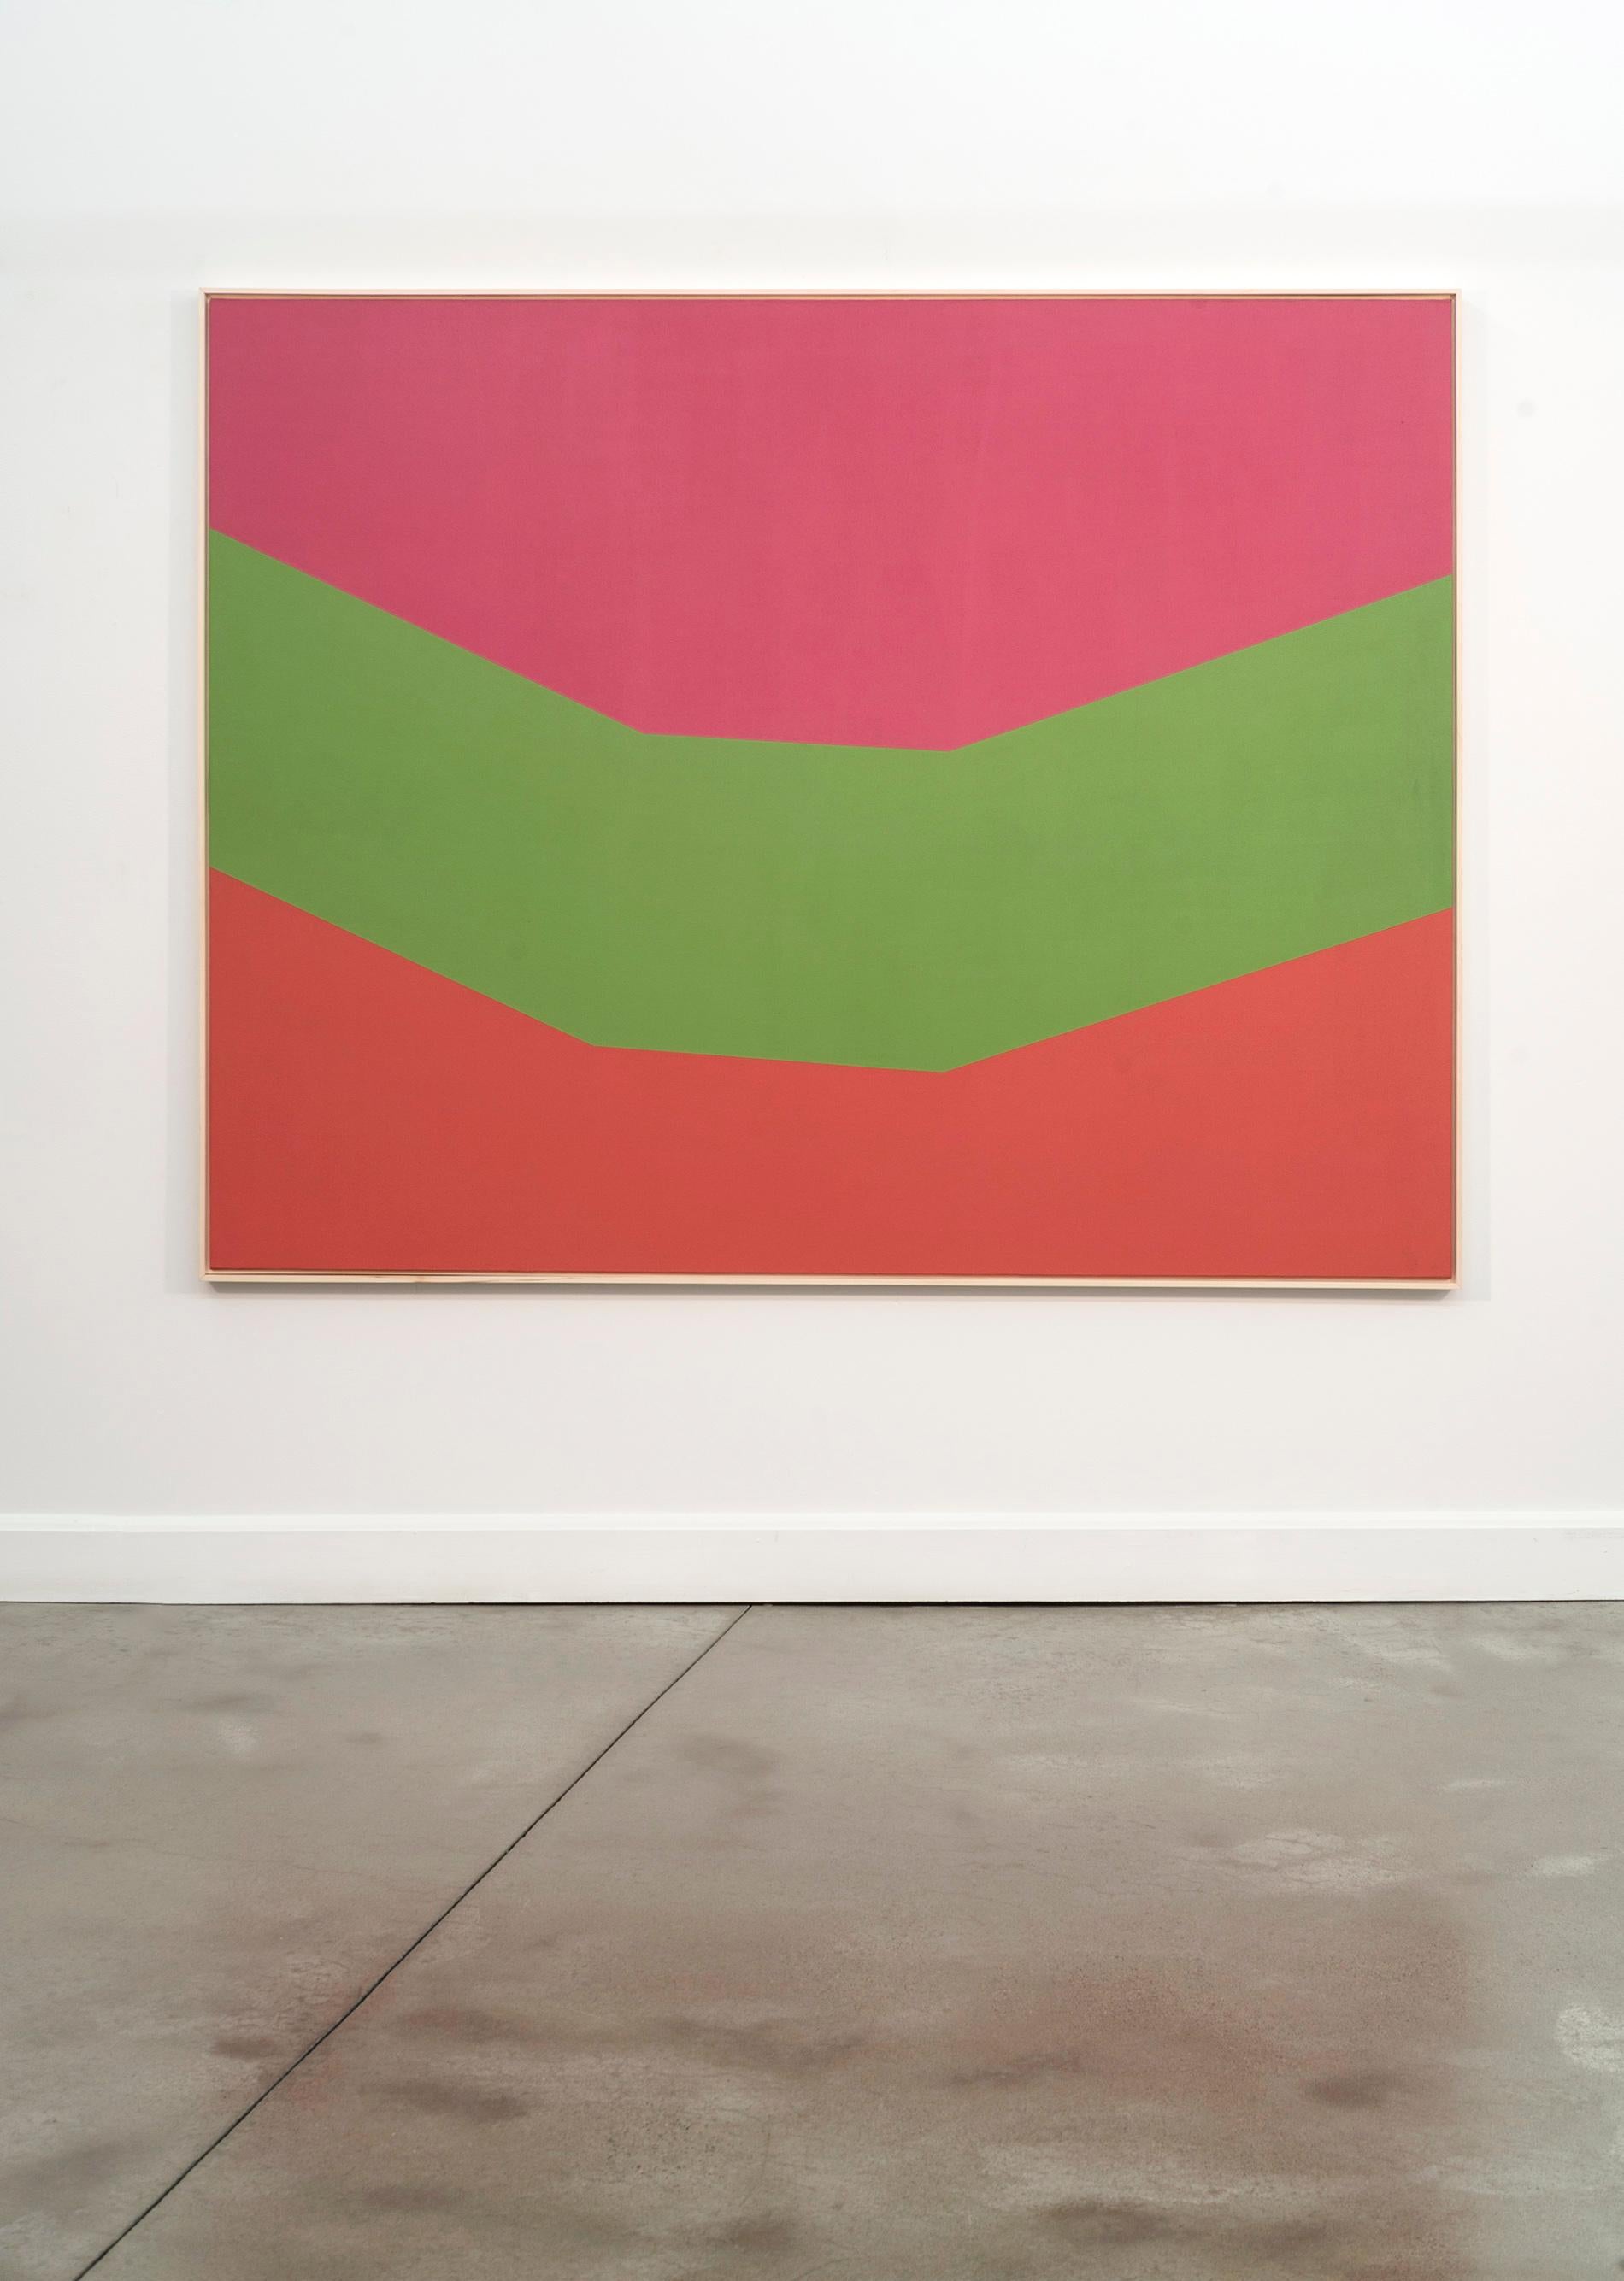 Field Green - large, green, pink, orange, minimal abstract, acrylic on canvas - Painting by Milly Ristvedt